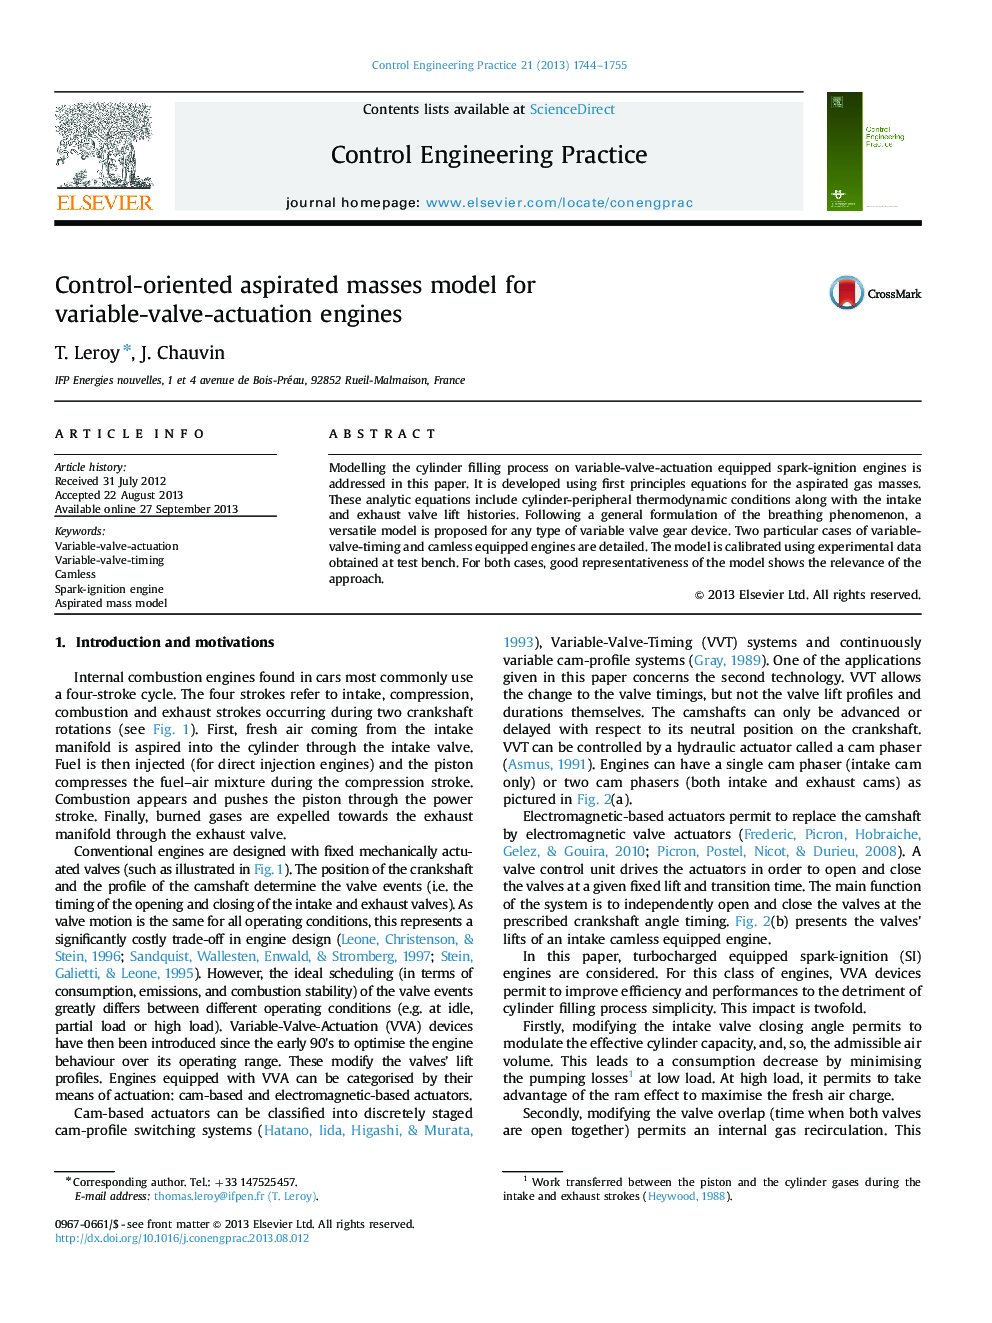 Control-oriented aspirated masses model for variable-valve-actuation engines